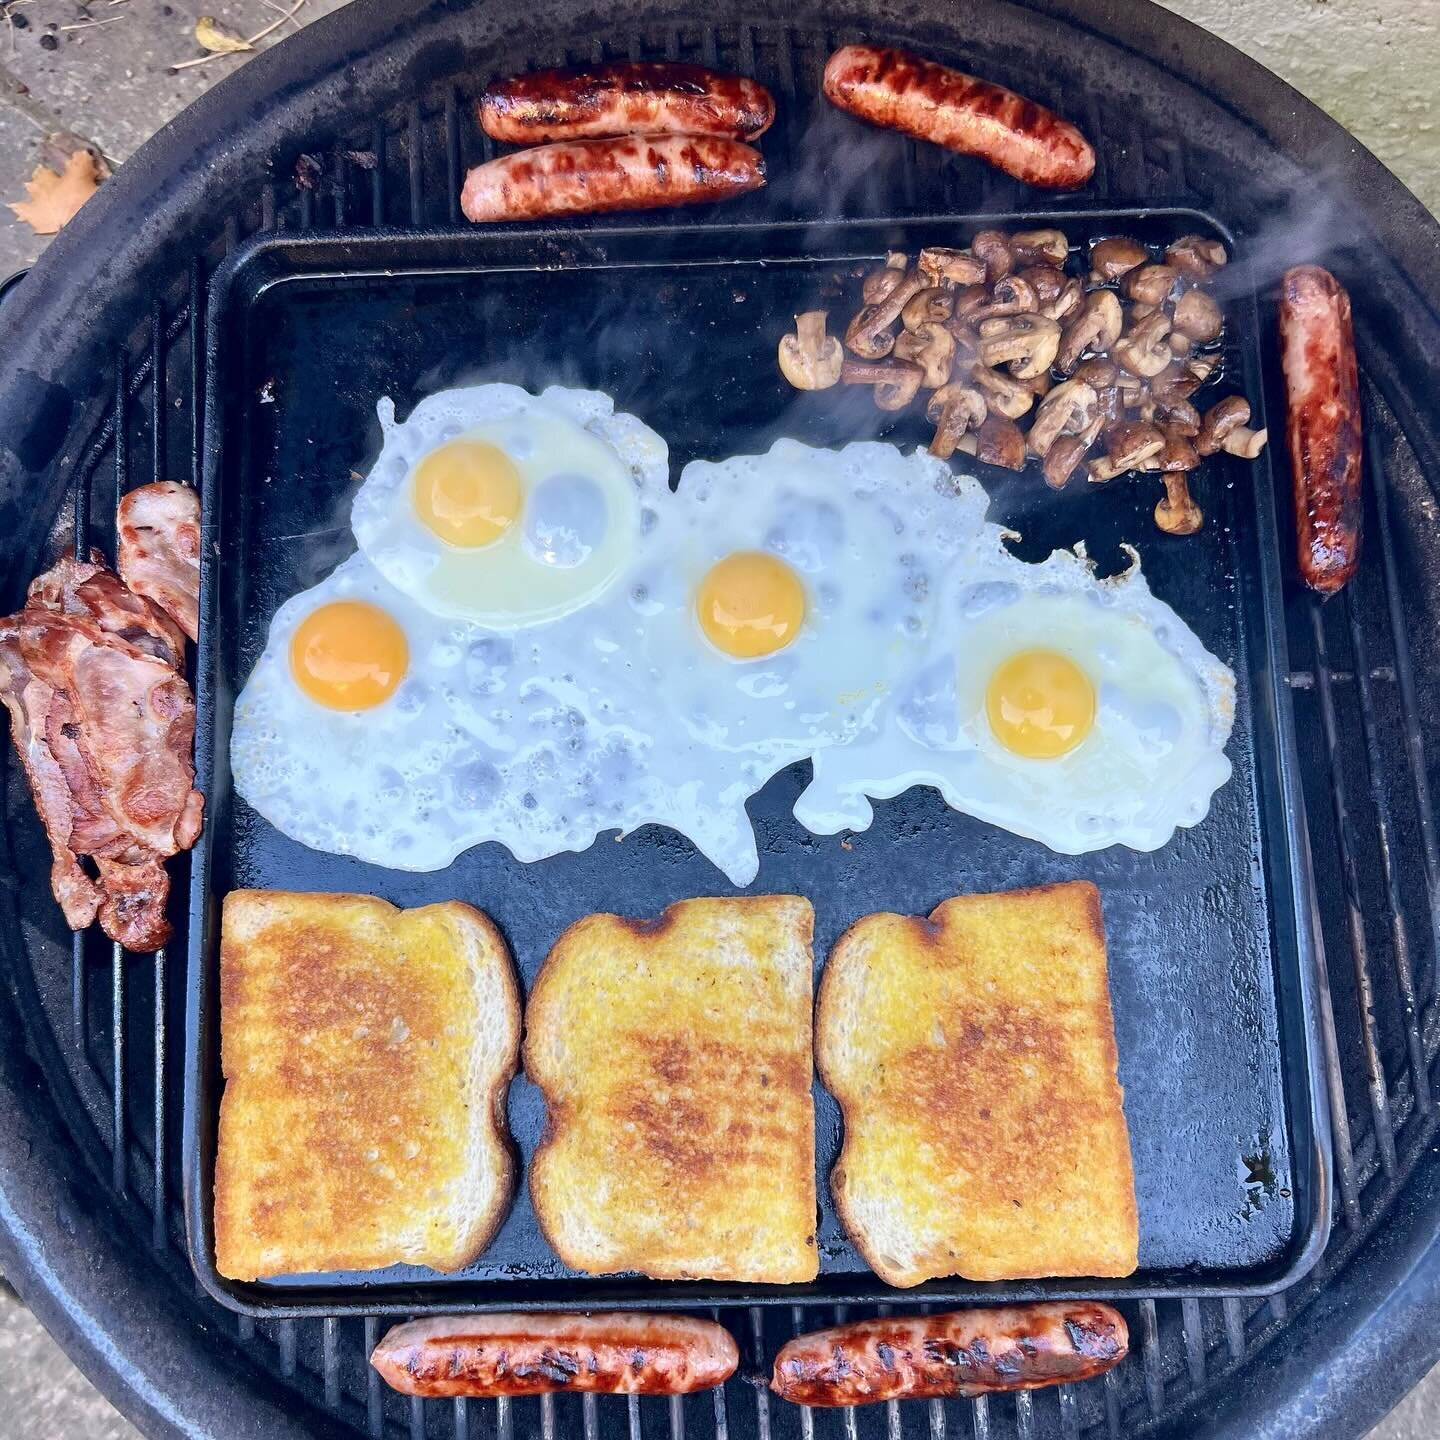 Marginally hungover wife means I get kicked out of bed to make a fry up! Well there are worse ways to start your Sunday! Powered by @weberuk Kamado. The best grill ever.